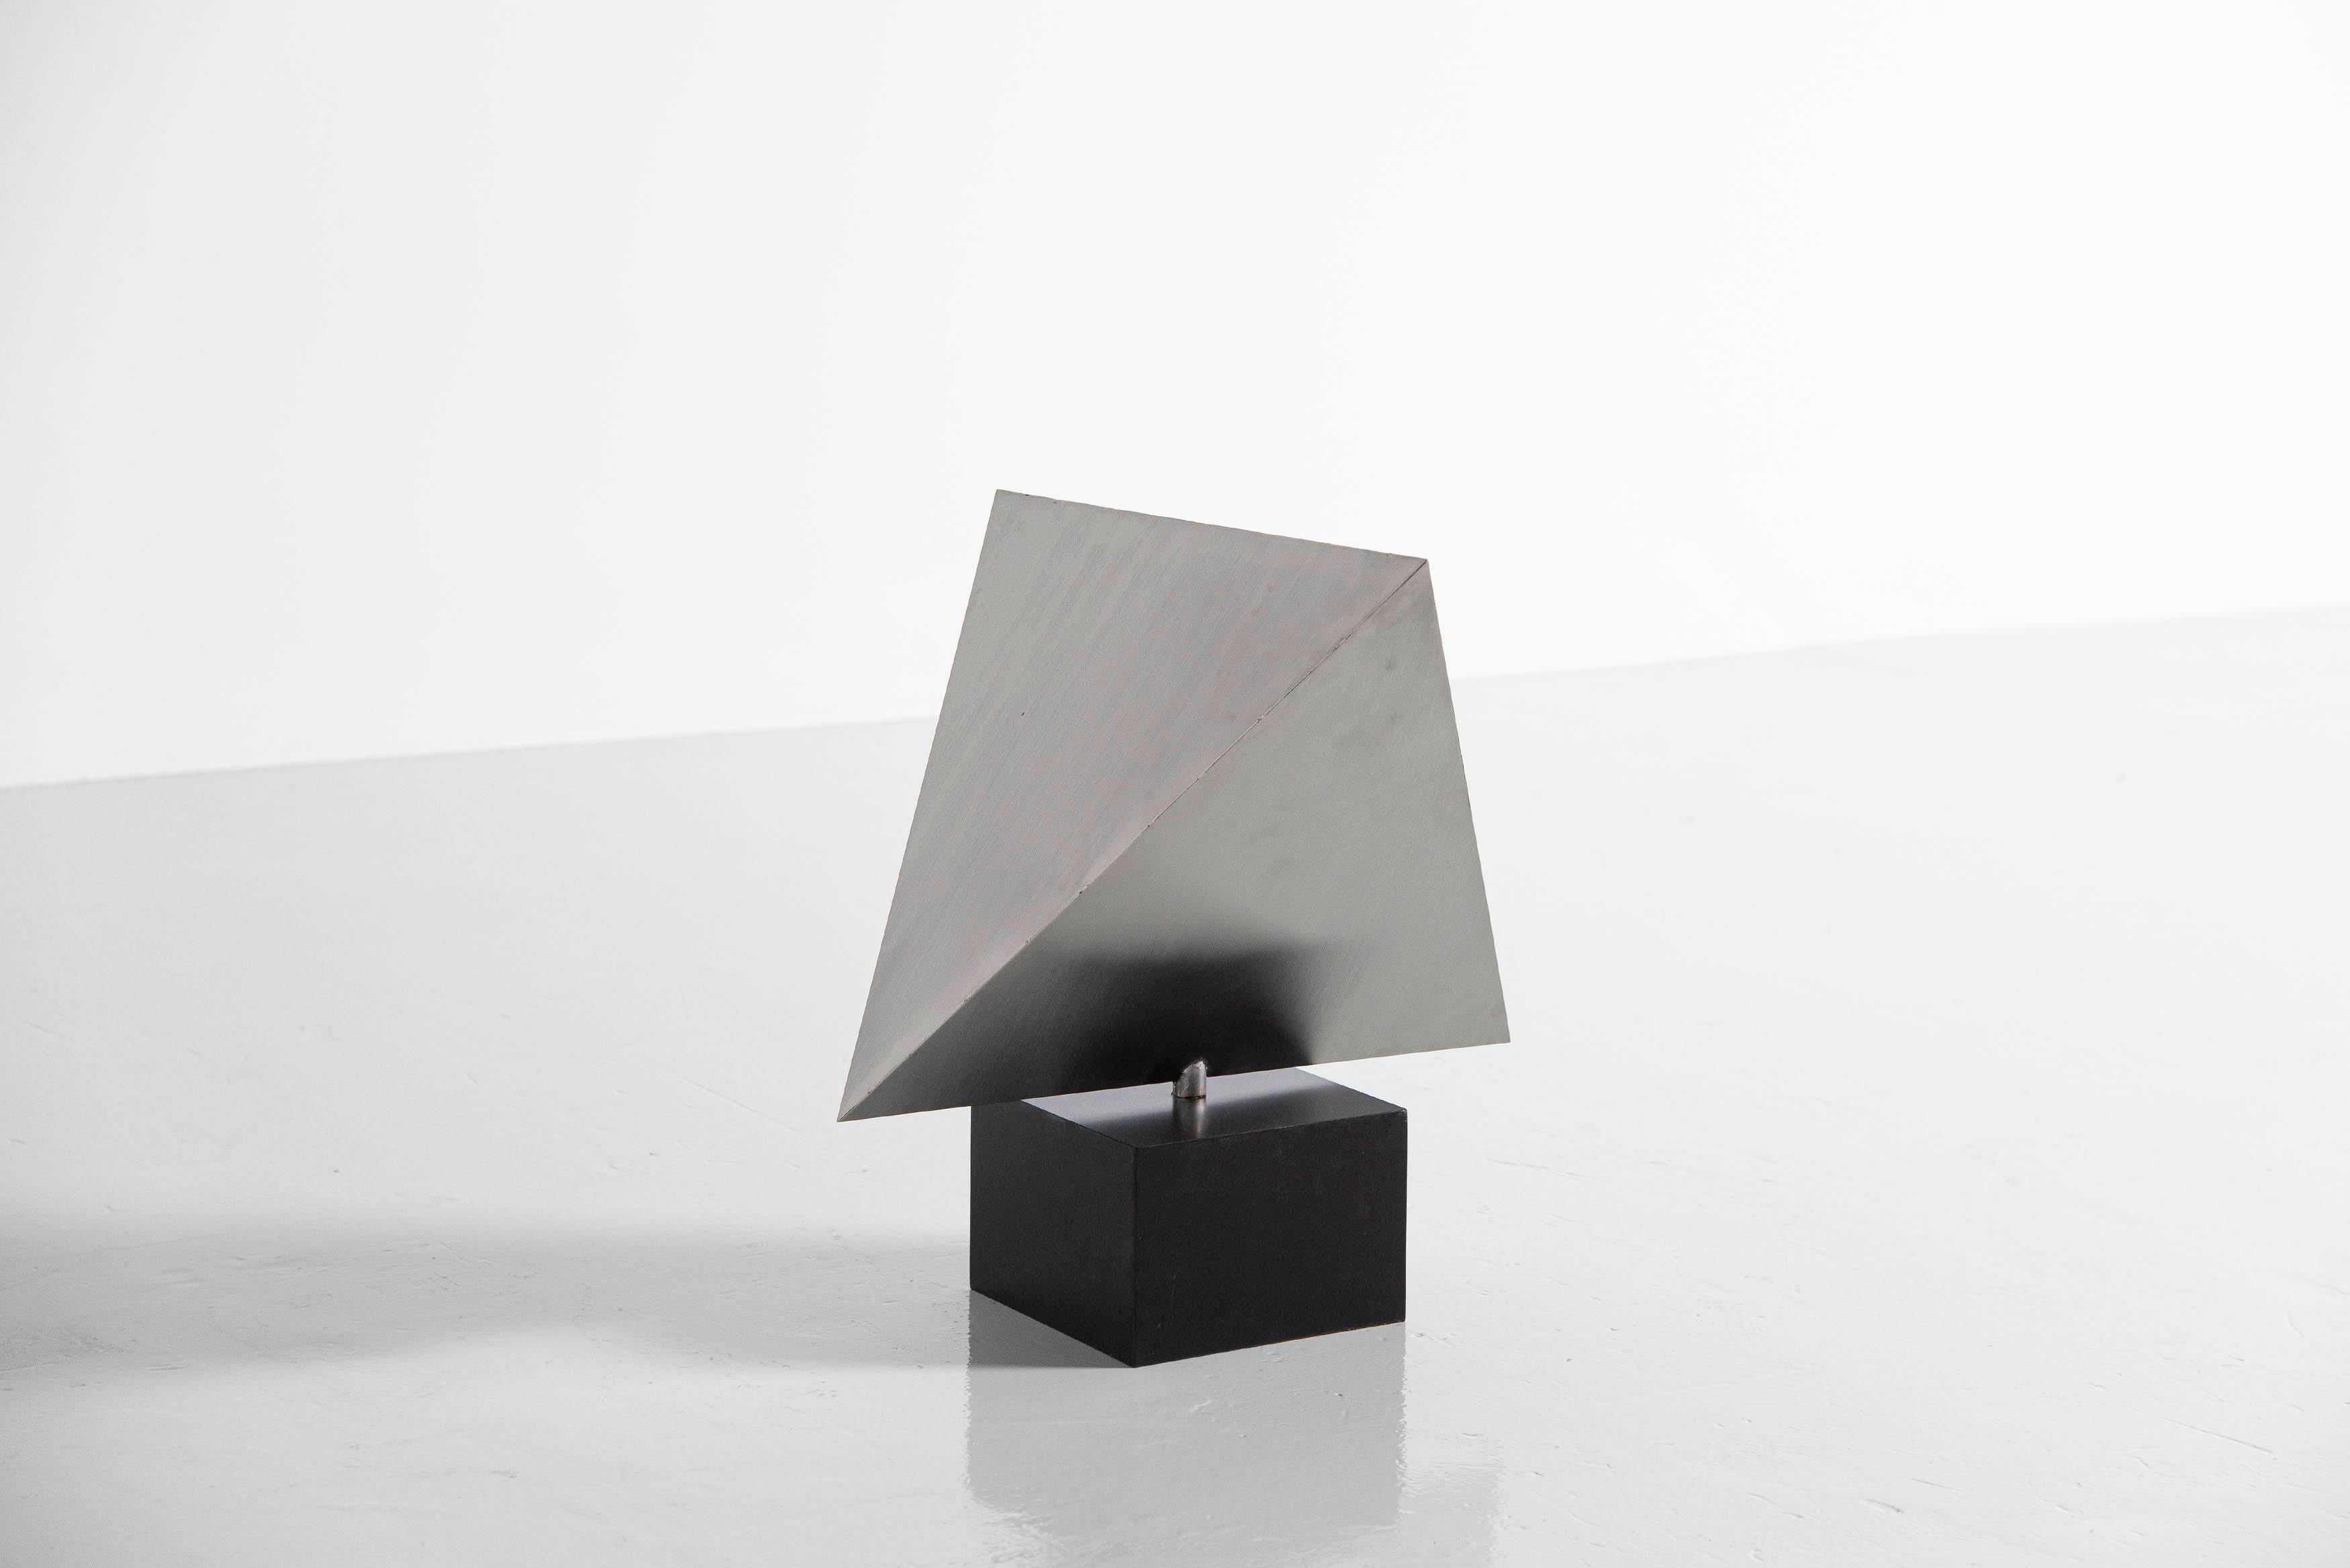 Very nice and large geometric sculpture designed by Rudolf Wolf and manufactured in his own atelier ca 1975. This sculpture is made of stainless steel and has a black painted wooden base. This sculpture is one of several we acquired from the former